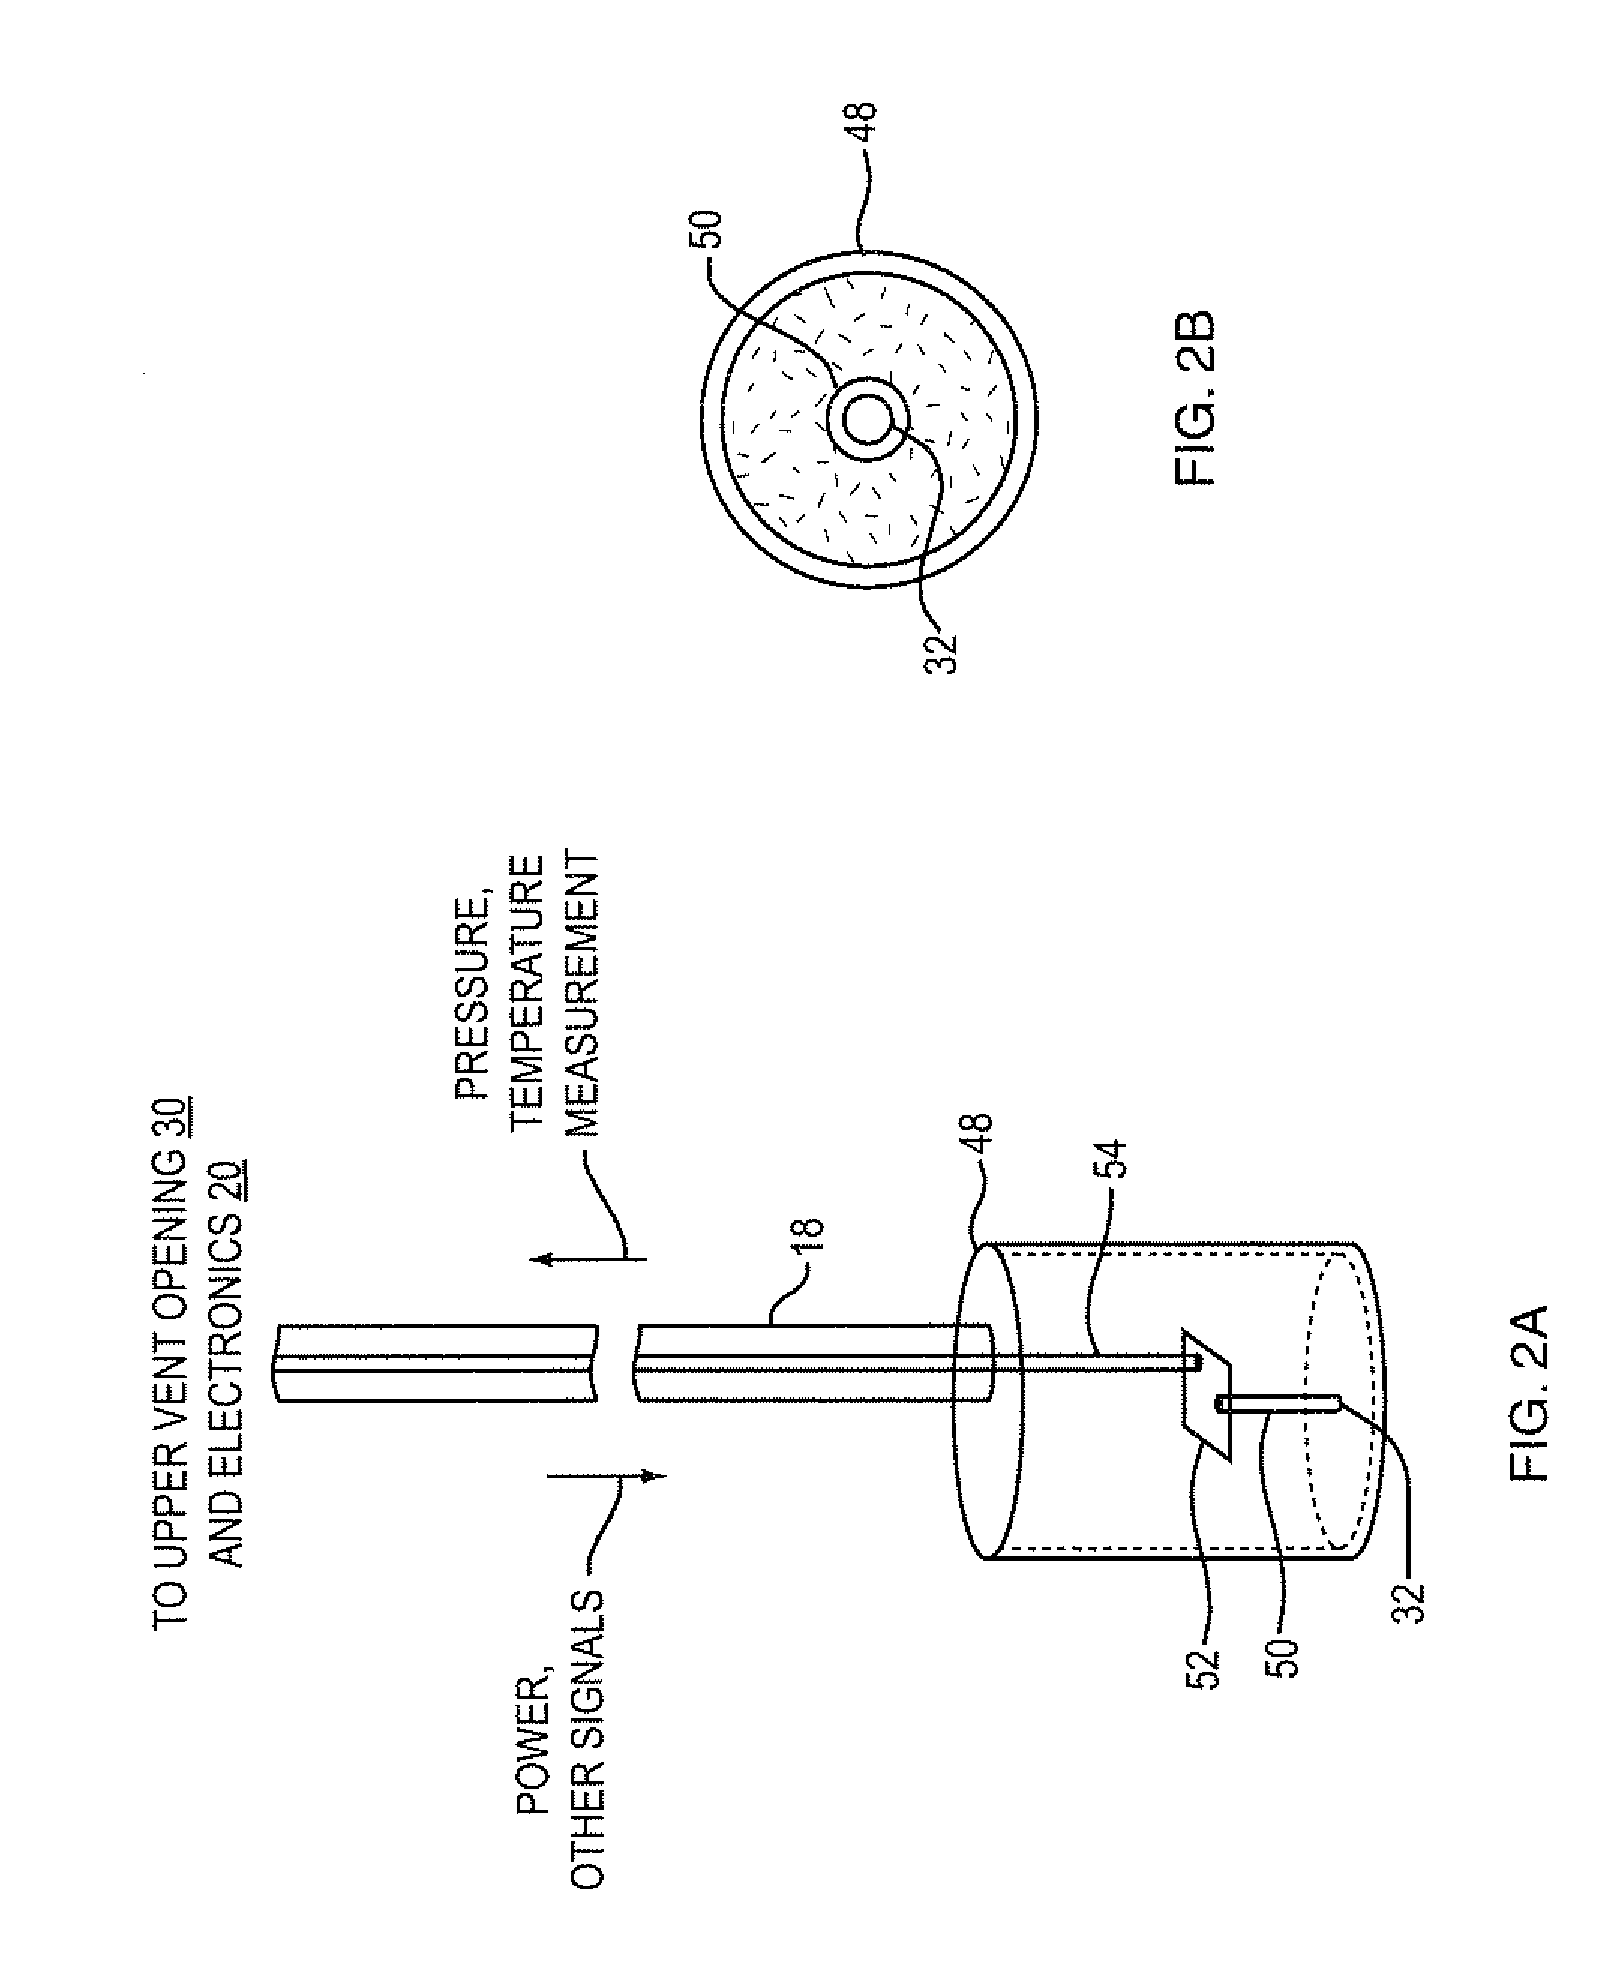 Remote level gauge adapted for liquid fuel tank